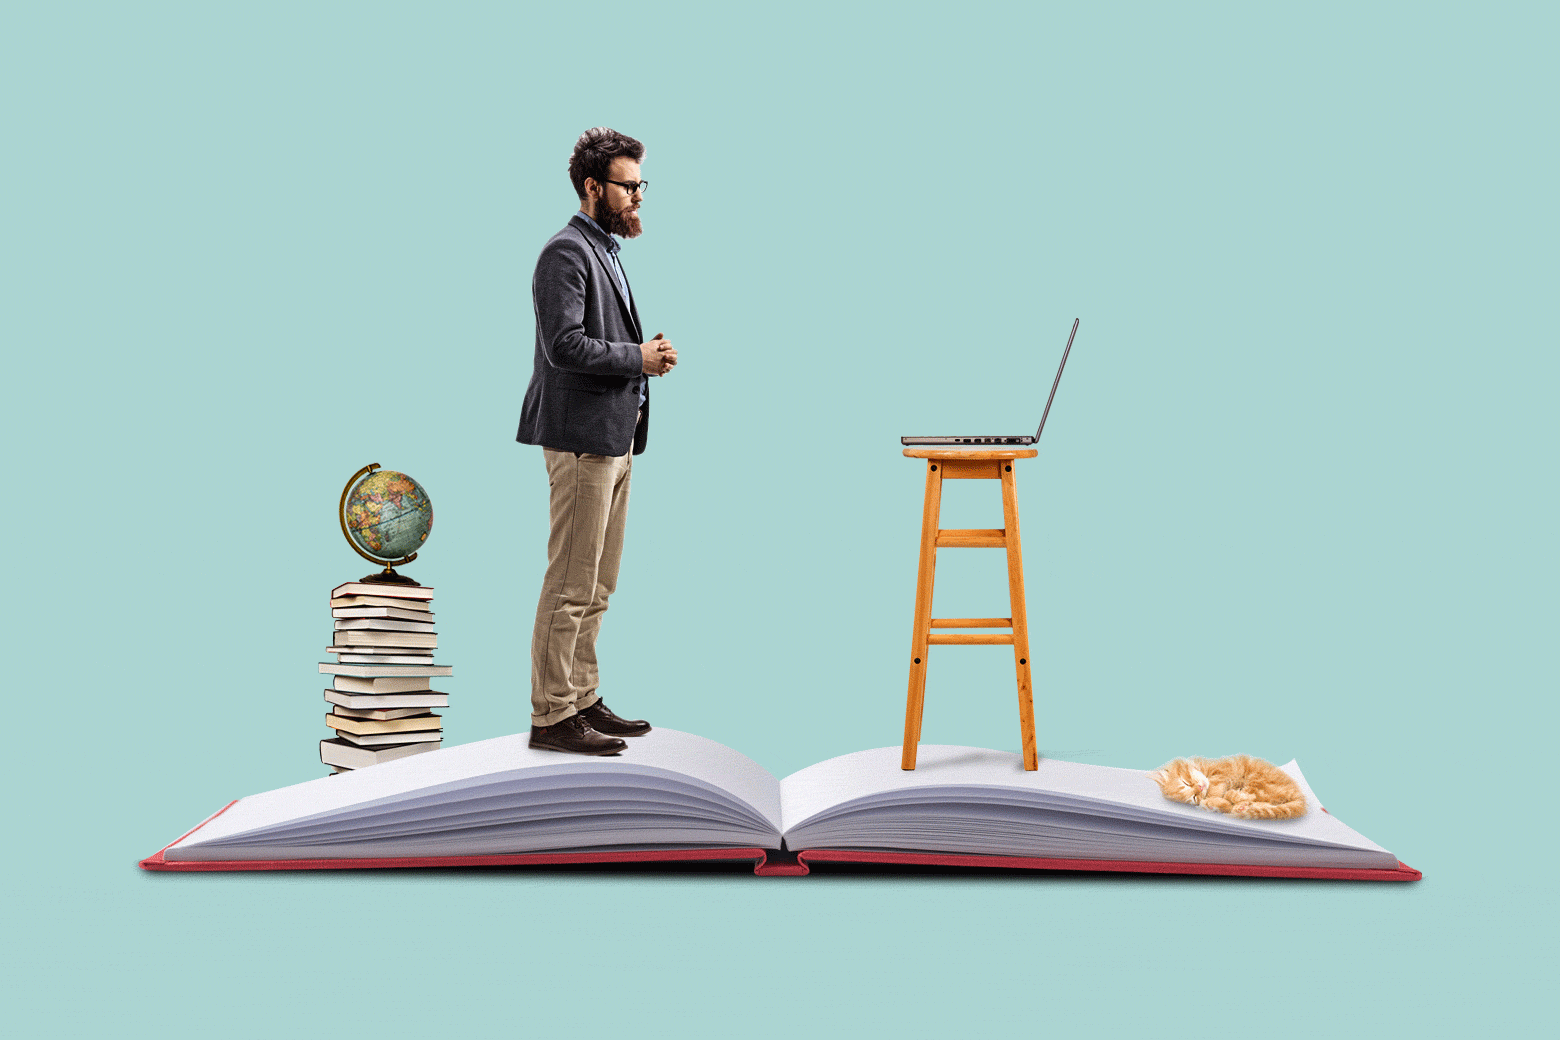 A teacher gestures while standing in front of a laptop on a stool. A cat, books, and a globe lie in the background.